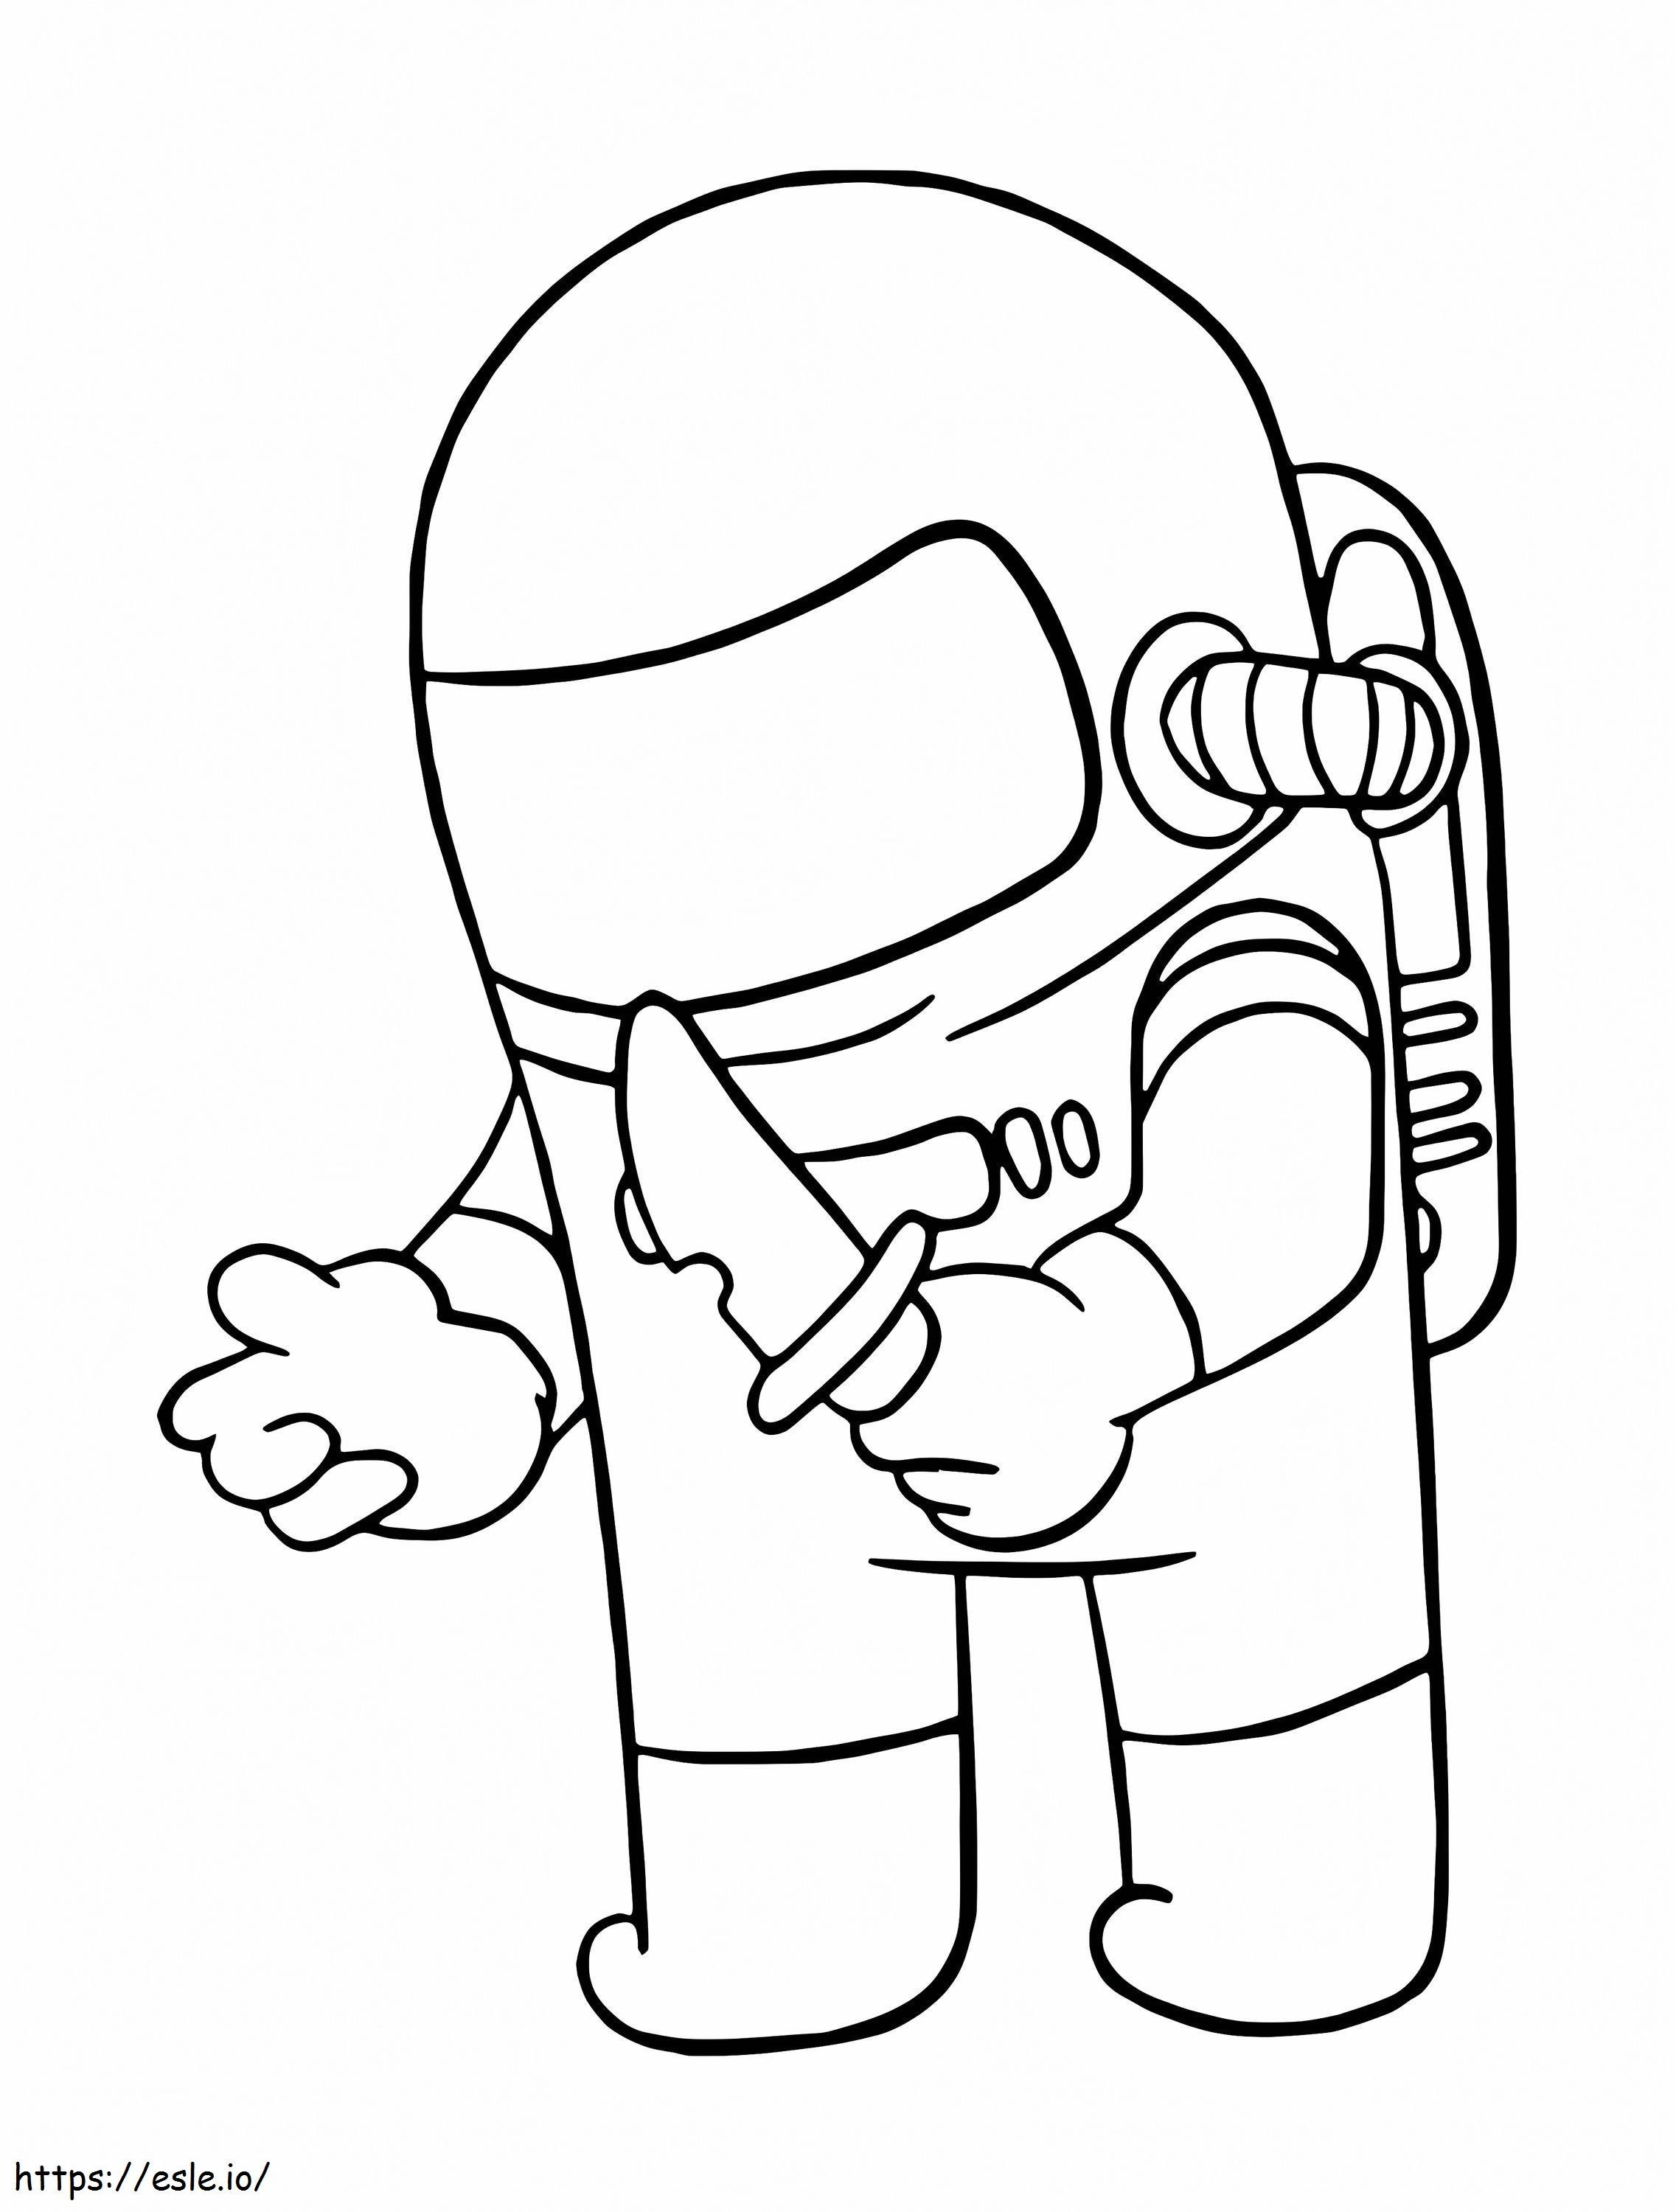 Imposter Holding Knife coloring page